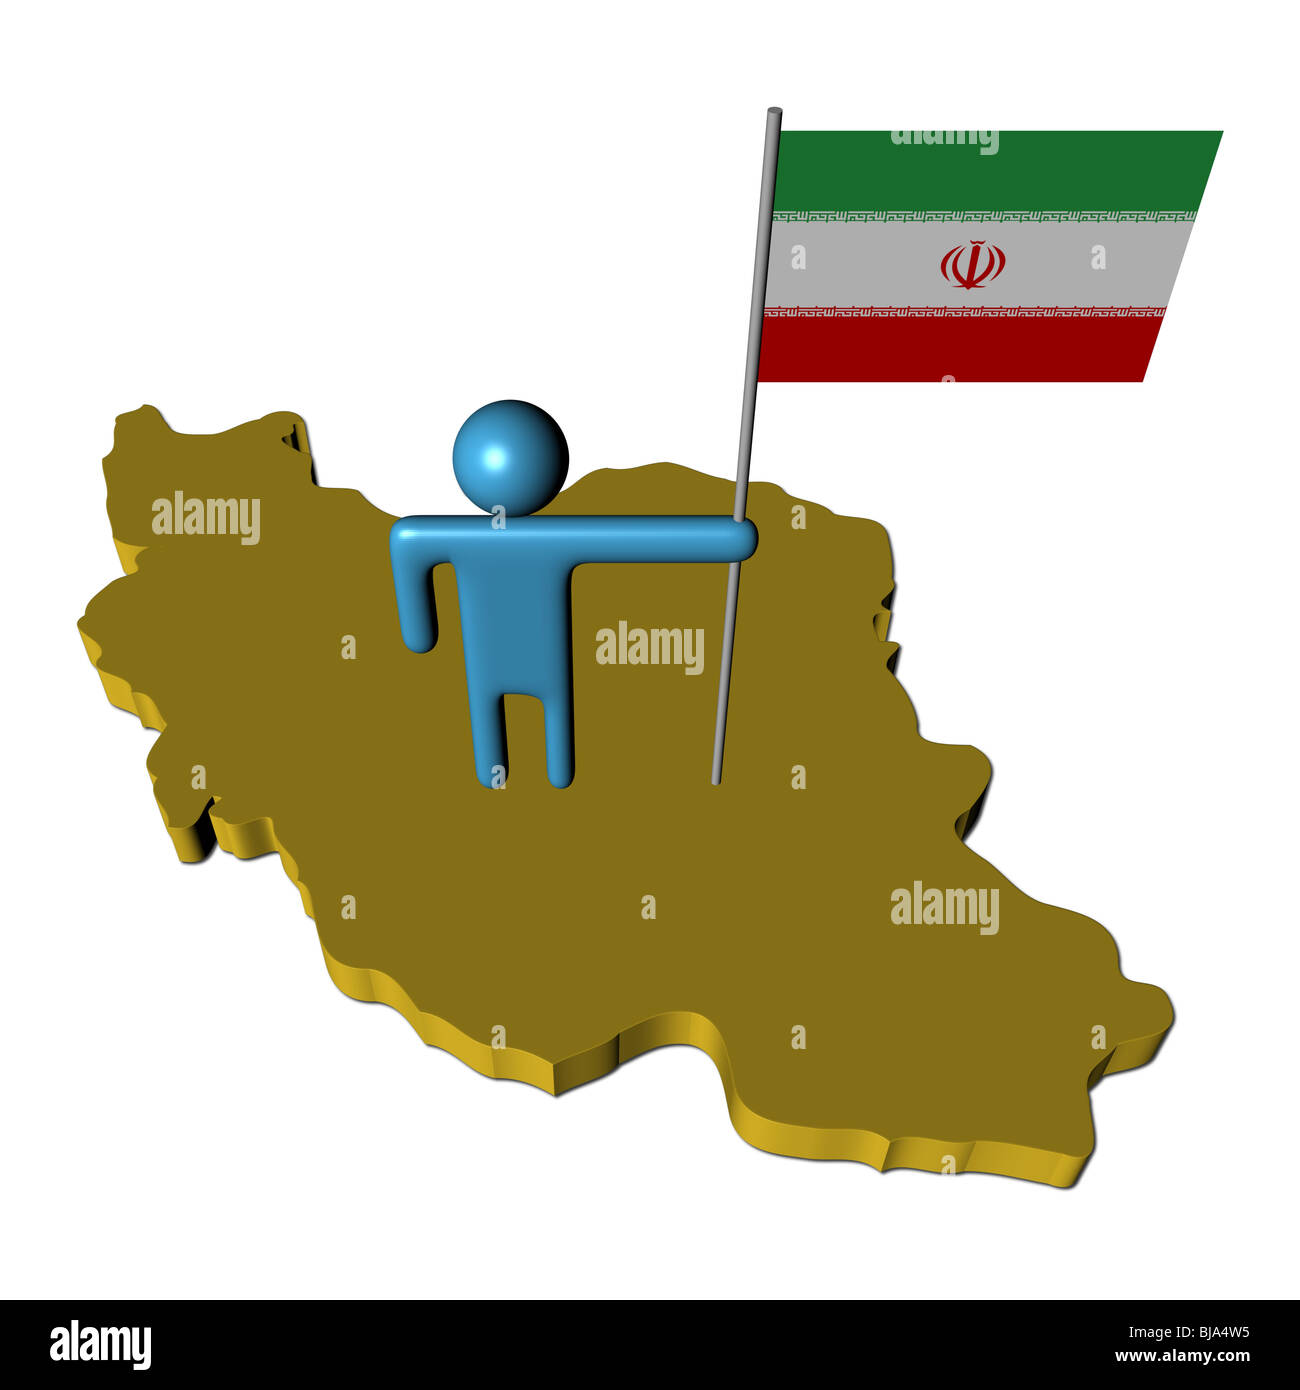 abstract person with Iranian flag on map illustration Stock Photo